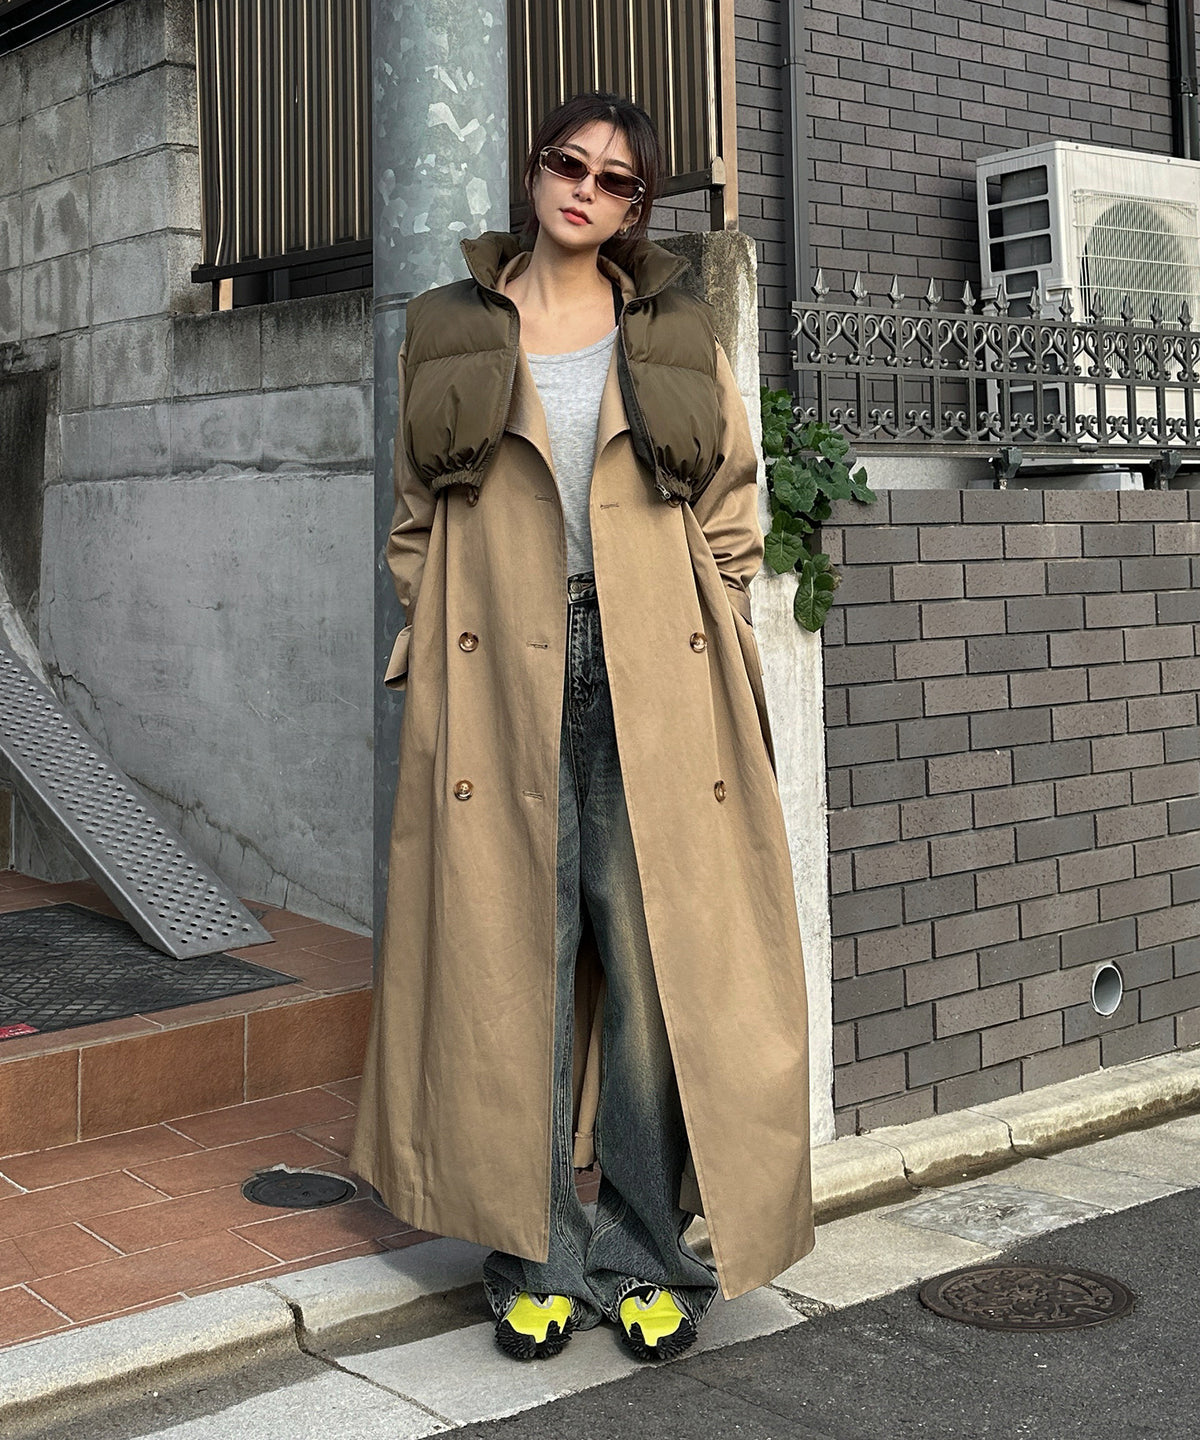 3way layered trench coat｜ACLENT（アクレント）